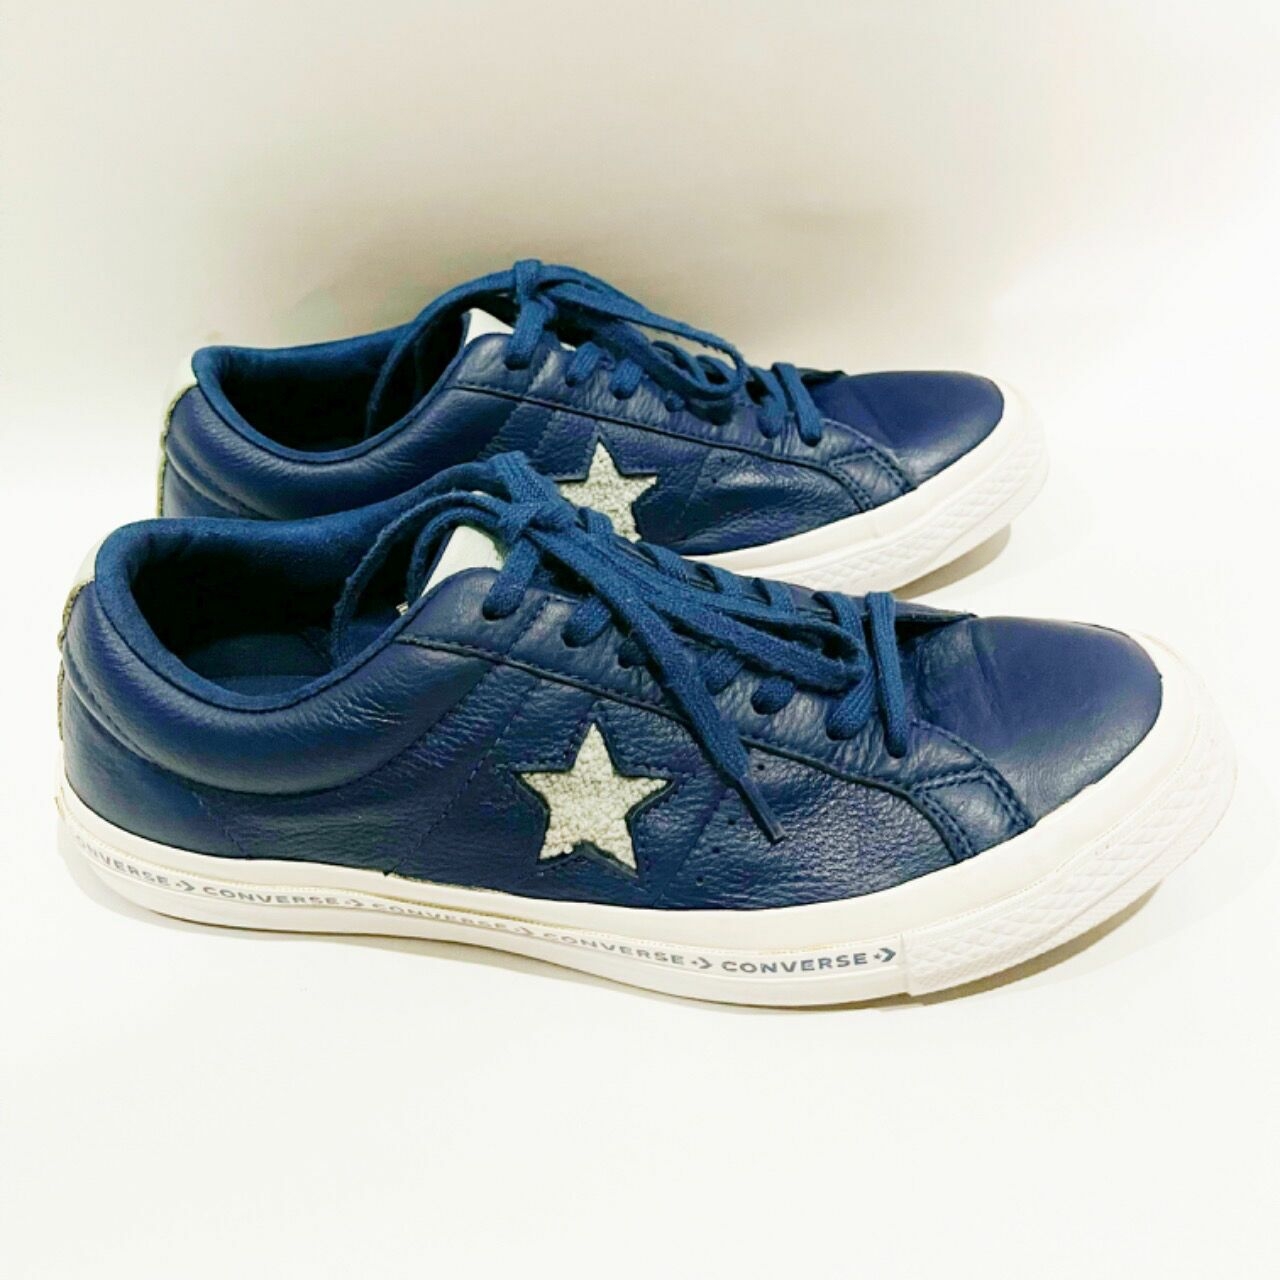 Converse Navy Plaid Sneakers